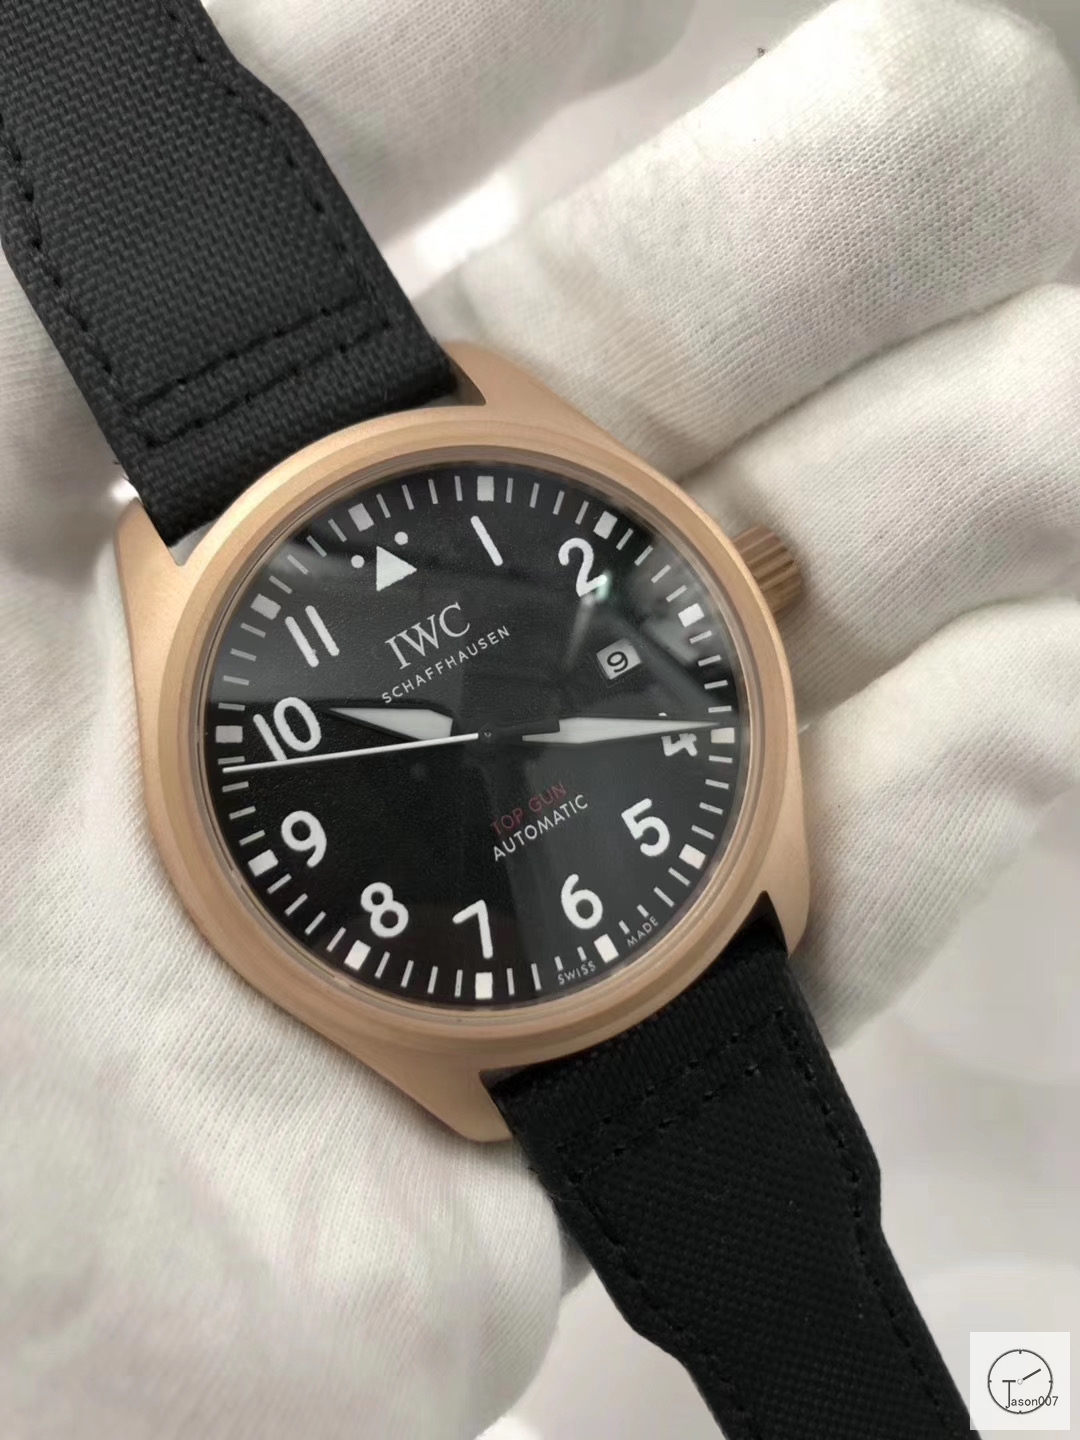 IWC PILOT'S SCHAFFHAUSEN Mark XV2 WATCH AUTOMATIC SPITFIRE AUTOMATIC Mechical IW326803 42MM BLACK DIAL Everose Gold Case Stainless Steel Case Stainless Steel Strap Mens Wristwatches ICW22250560